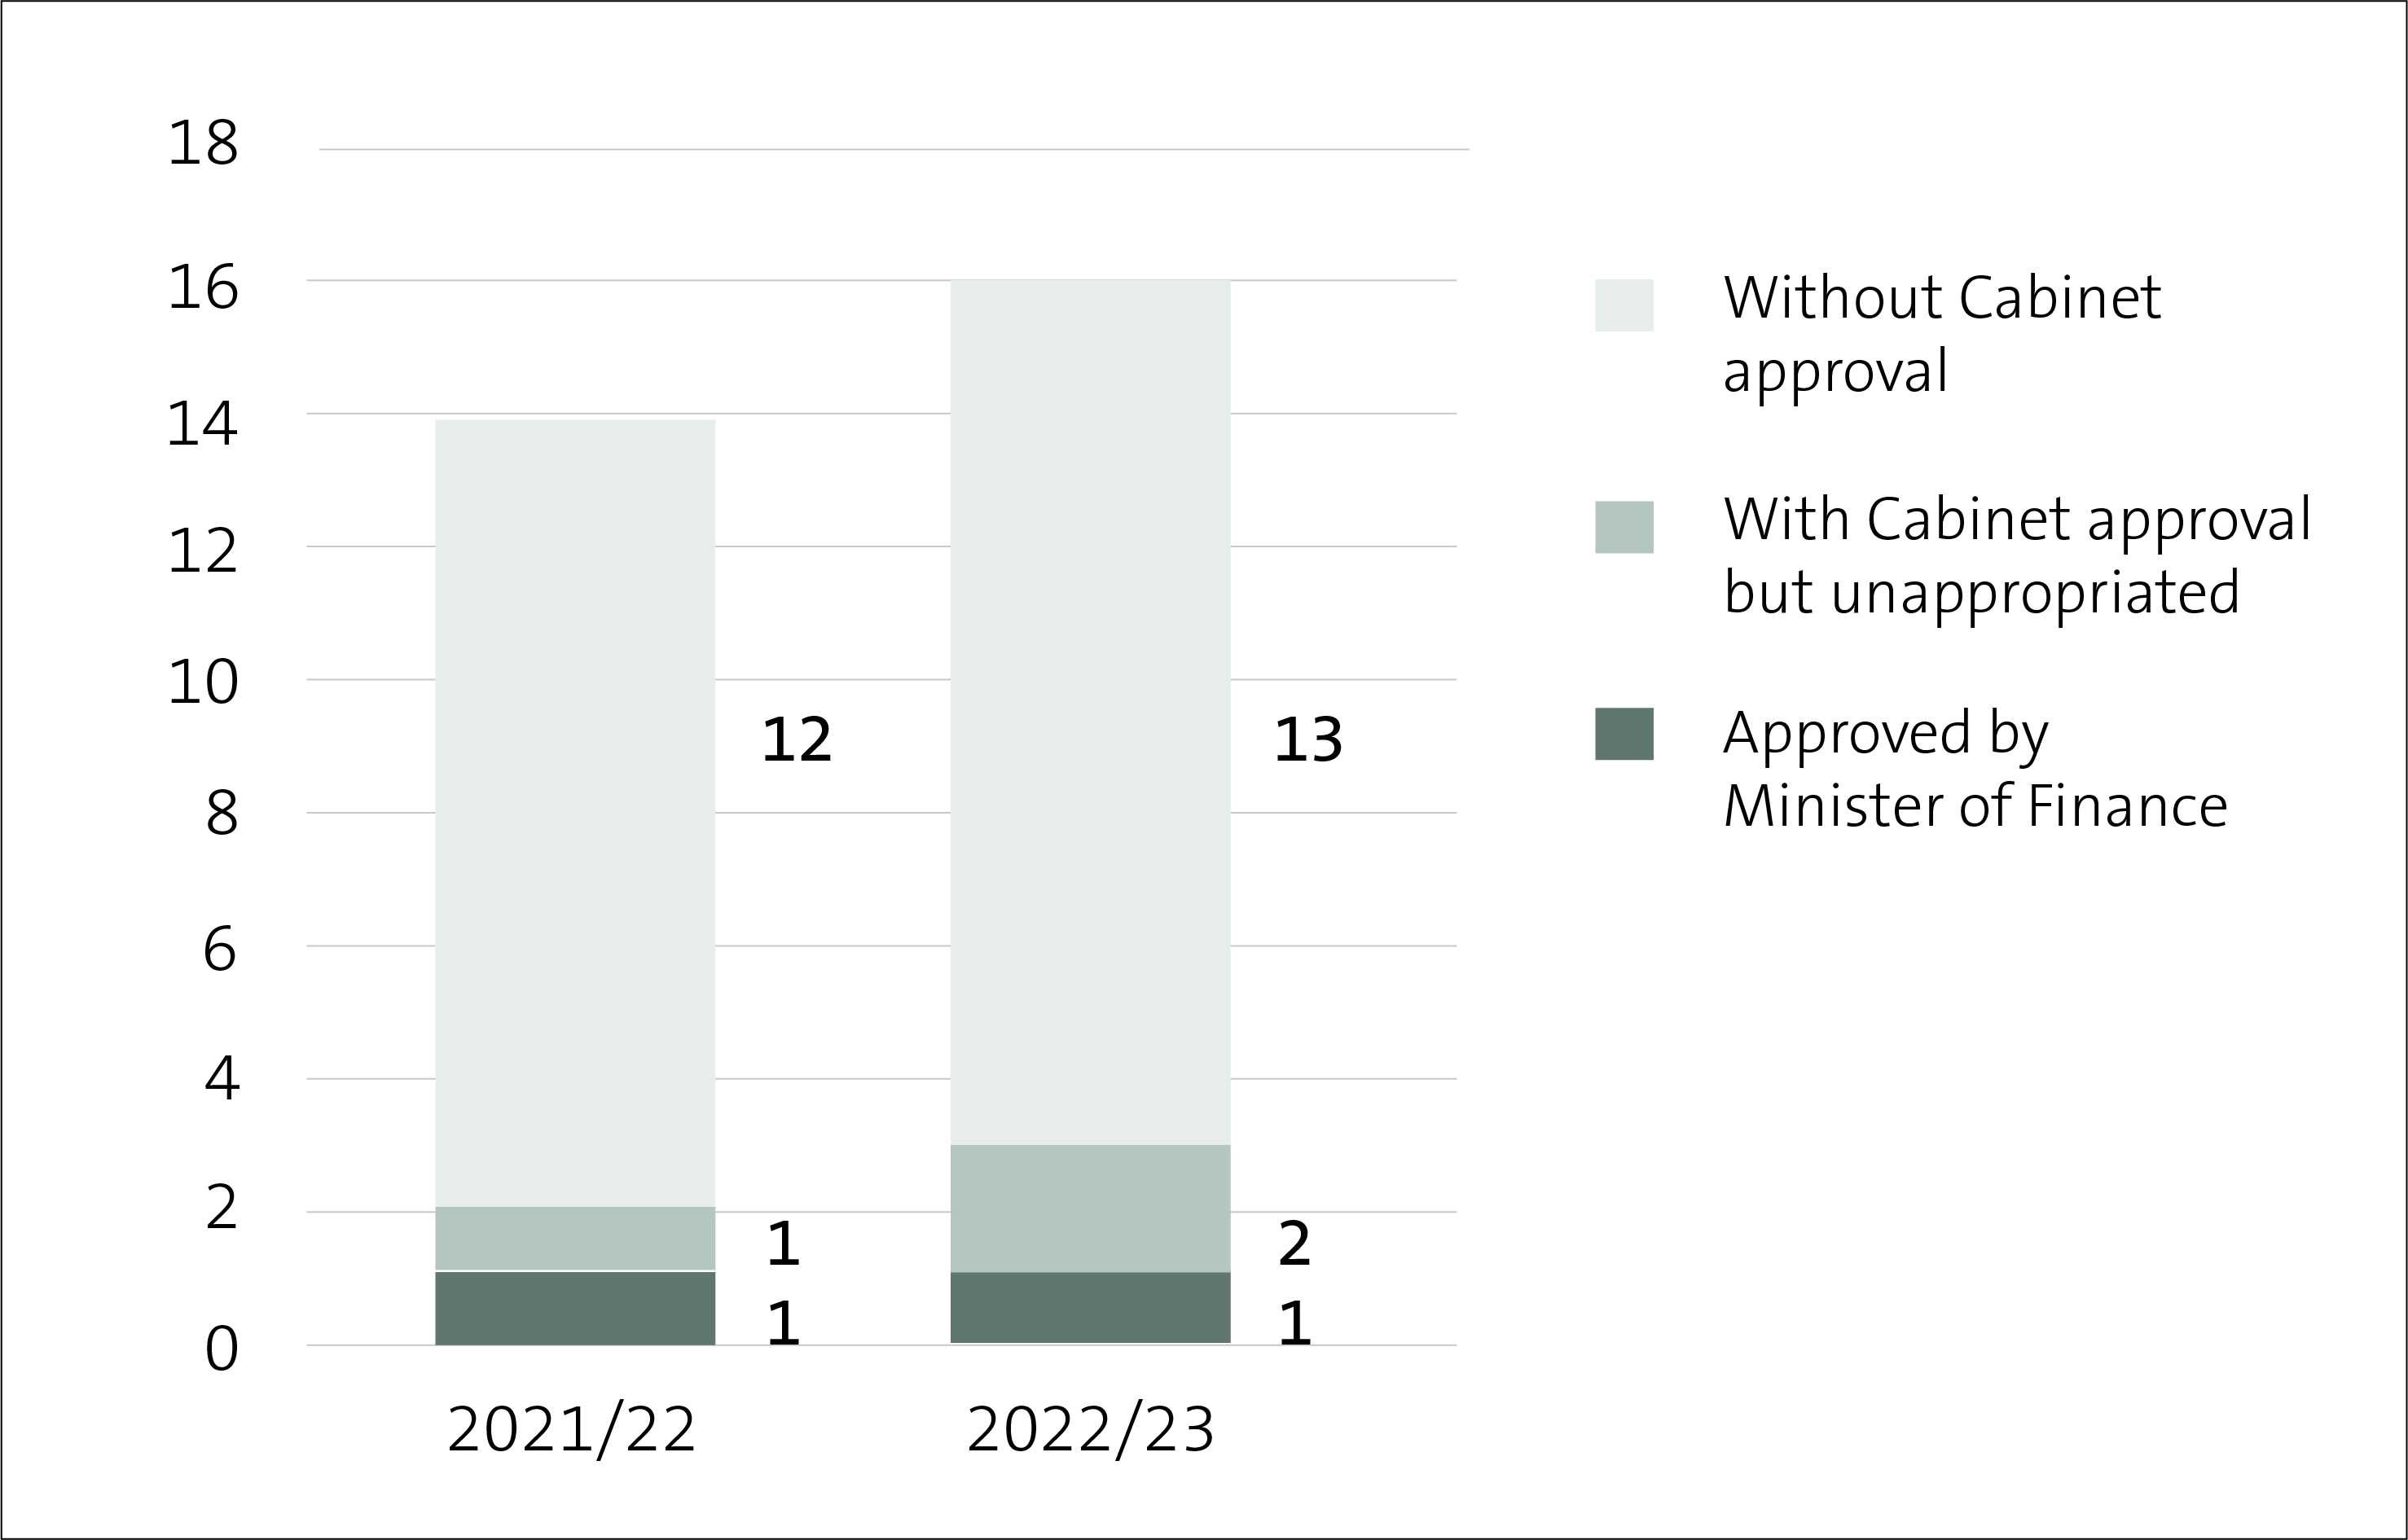 Figure 2 - Number of instances of unappropriated expenditure for 2021/22 and 2022/23